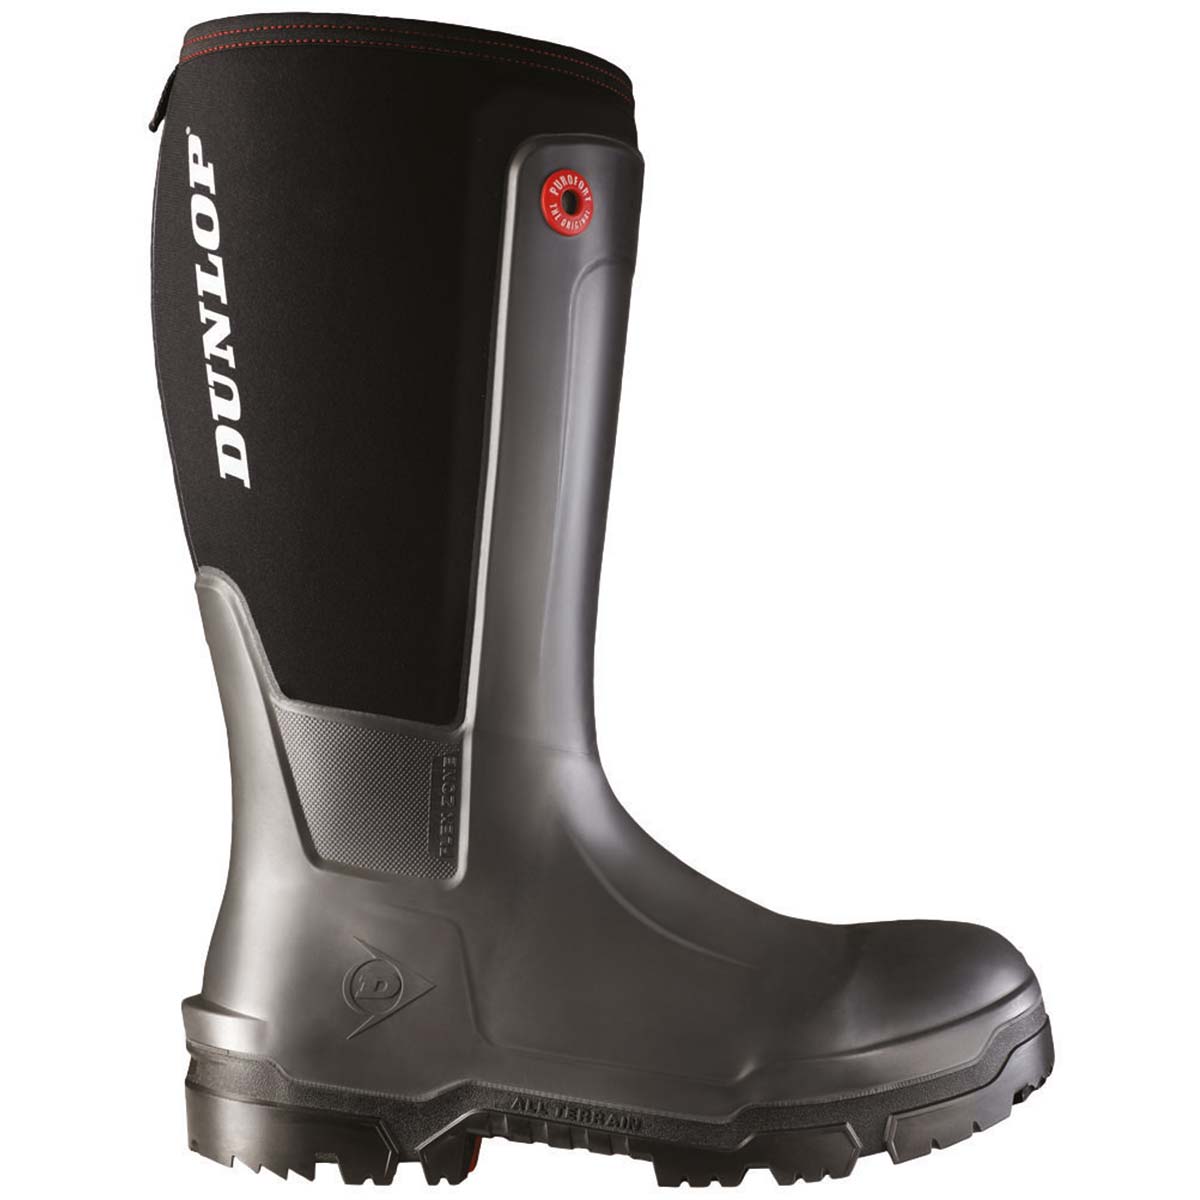 Dunlop Snugboot WorkPro Full Safety gumicsizma 38